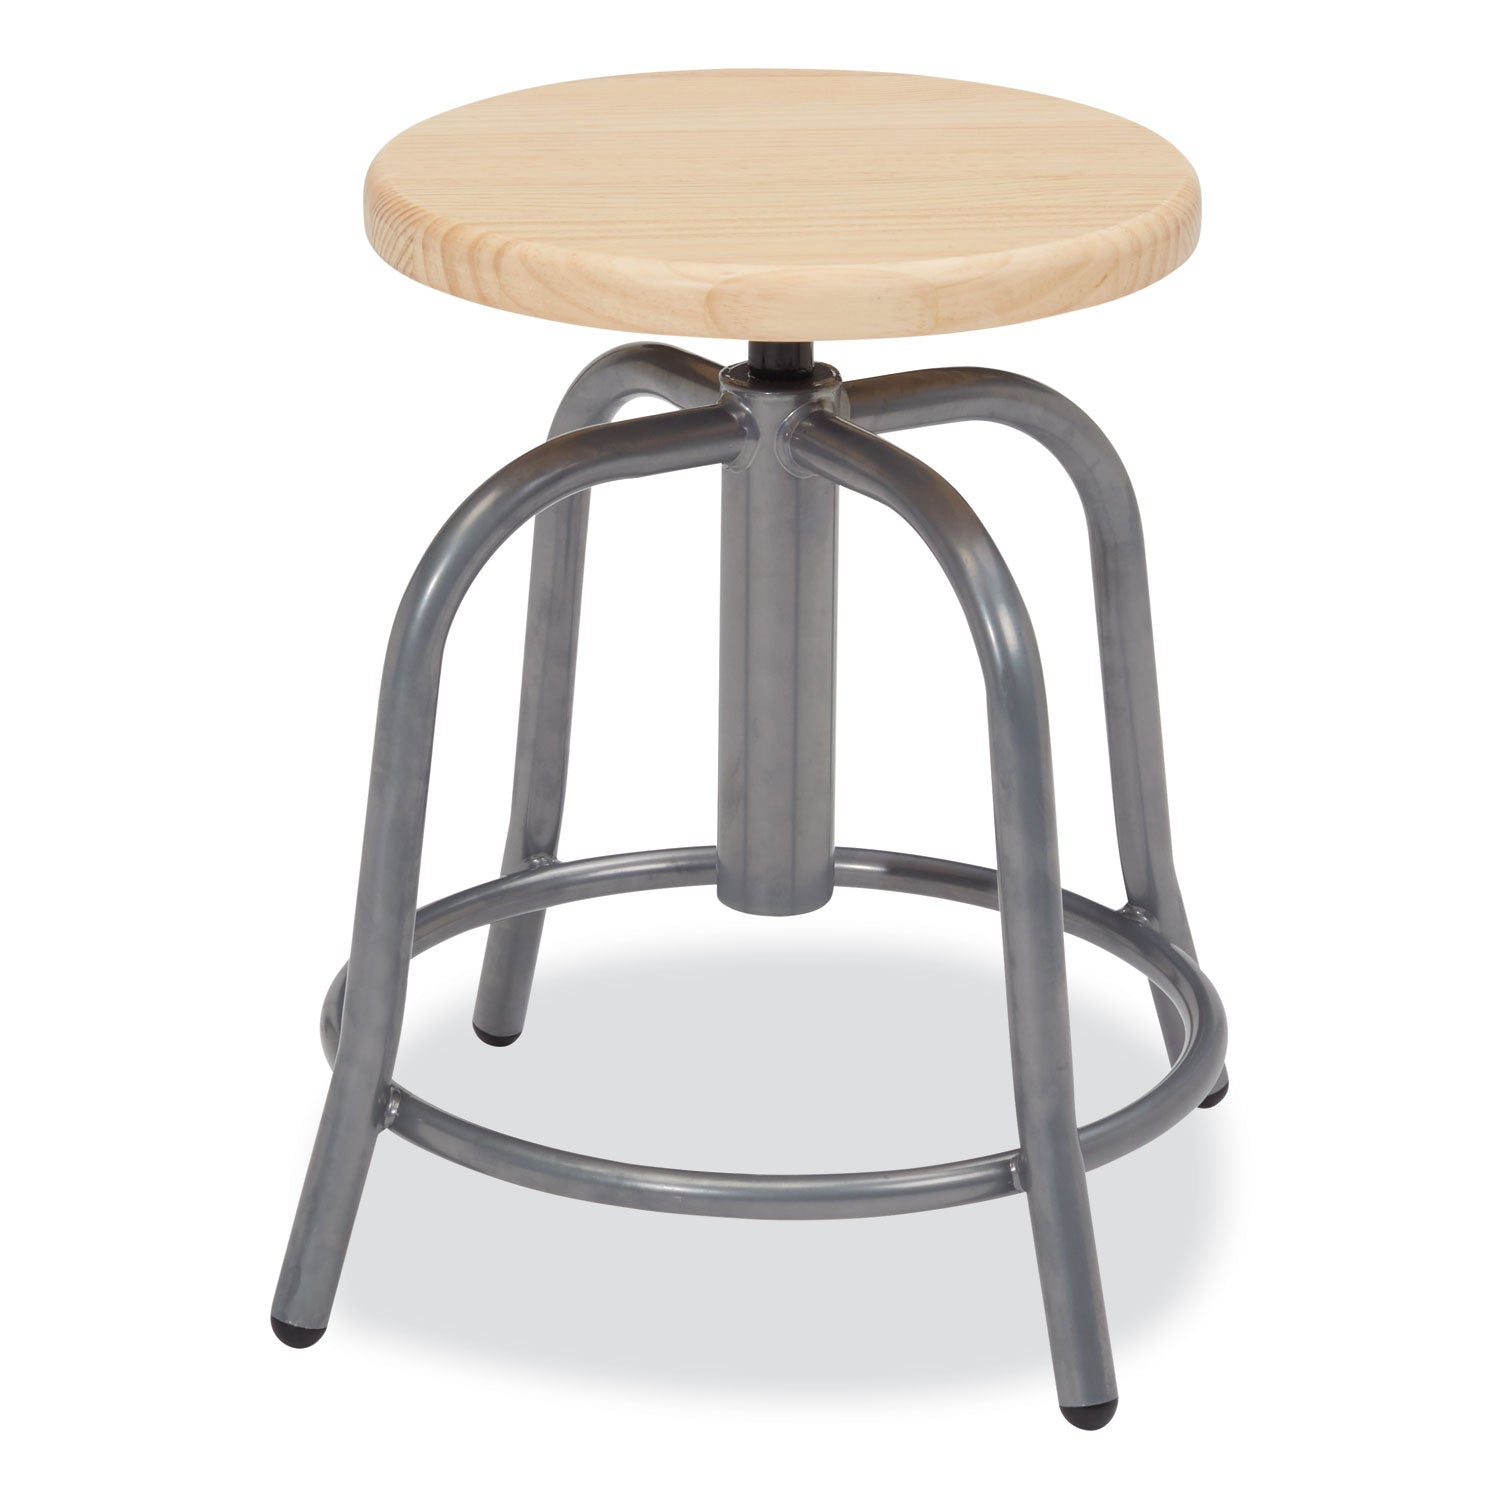 6800-series-height-adj-wood-seat-swivel-stool-supports-300-lb-19-25-seat-ht-maple-seat-gray-base-ships-in-1-3-bus-days_nps6800w02 - 1